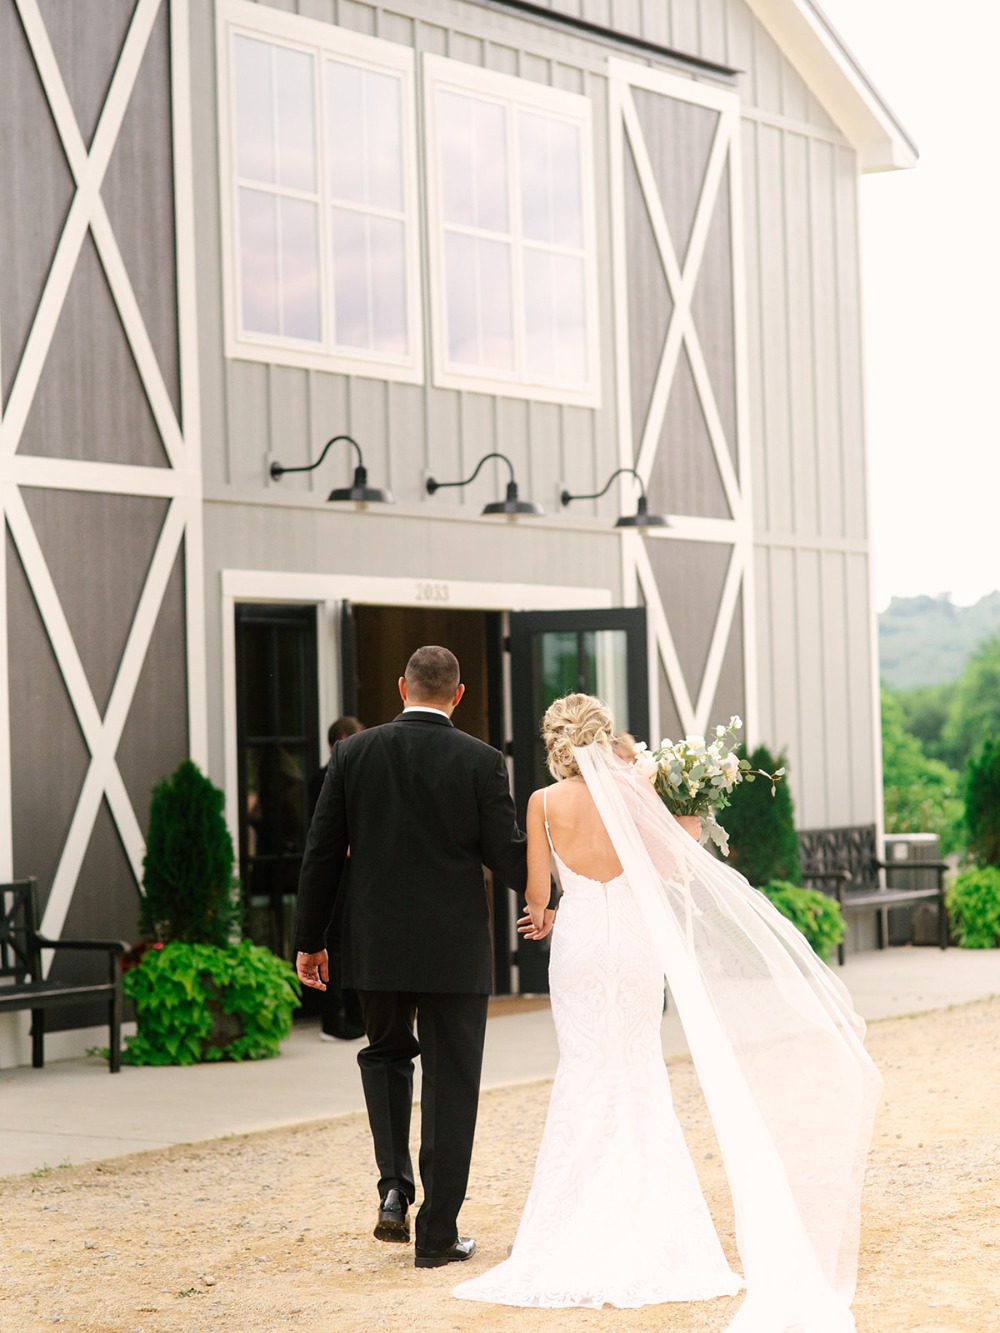 How To Have A Glam Garden Chic Wedding In A Barn